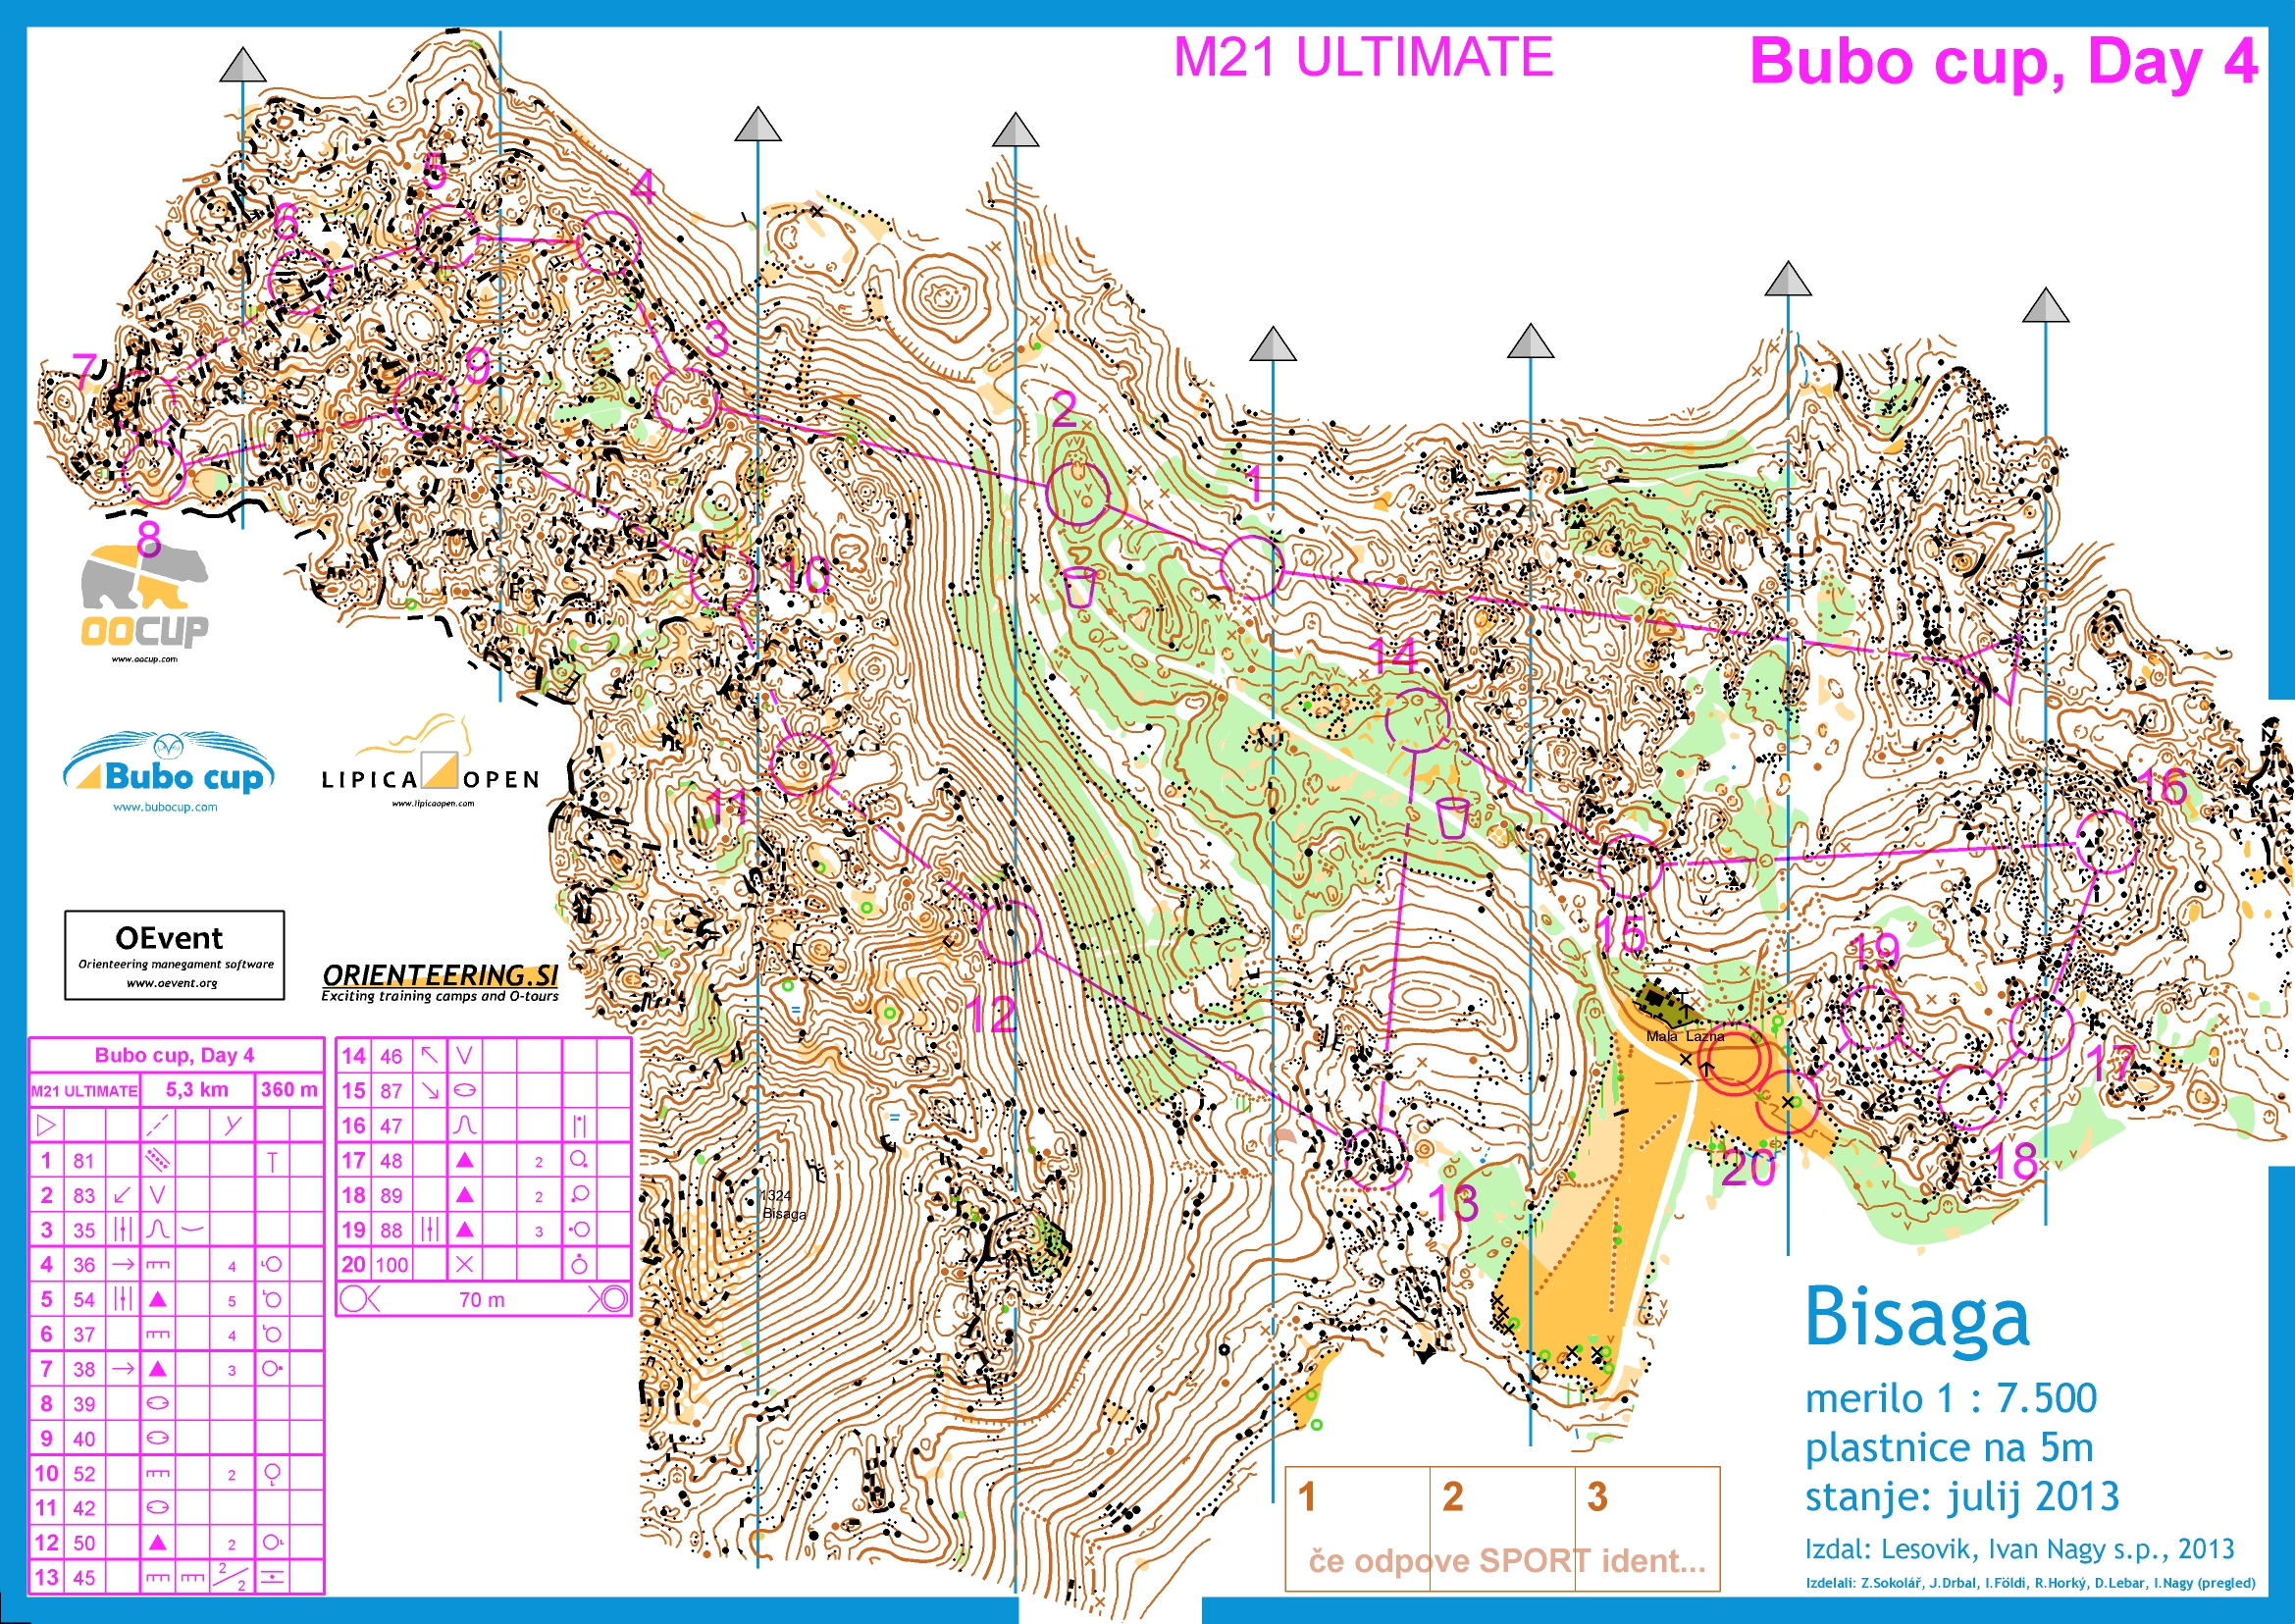 Bubo cup, Stage 4 M21 ULTIMATE (19-07-2013)